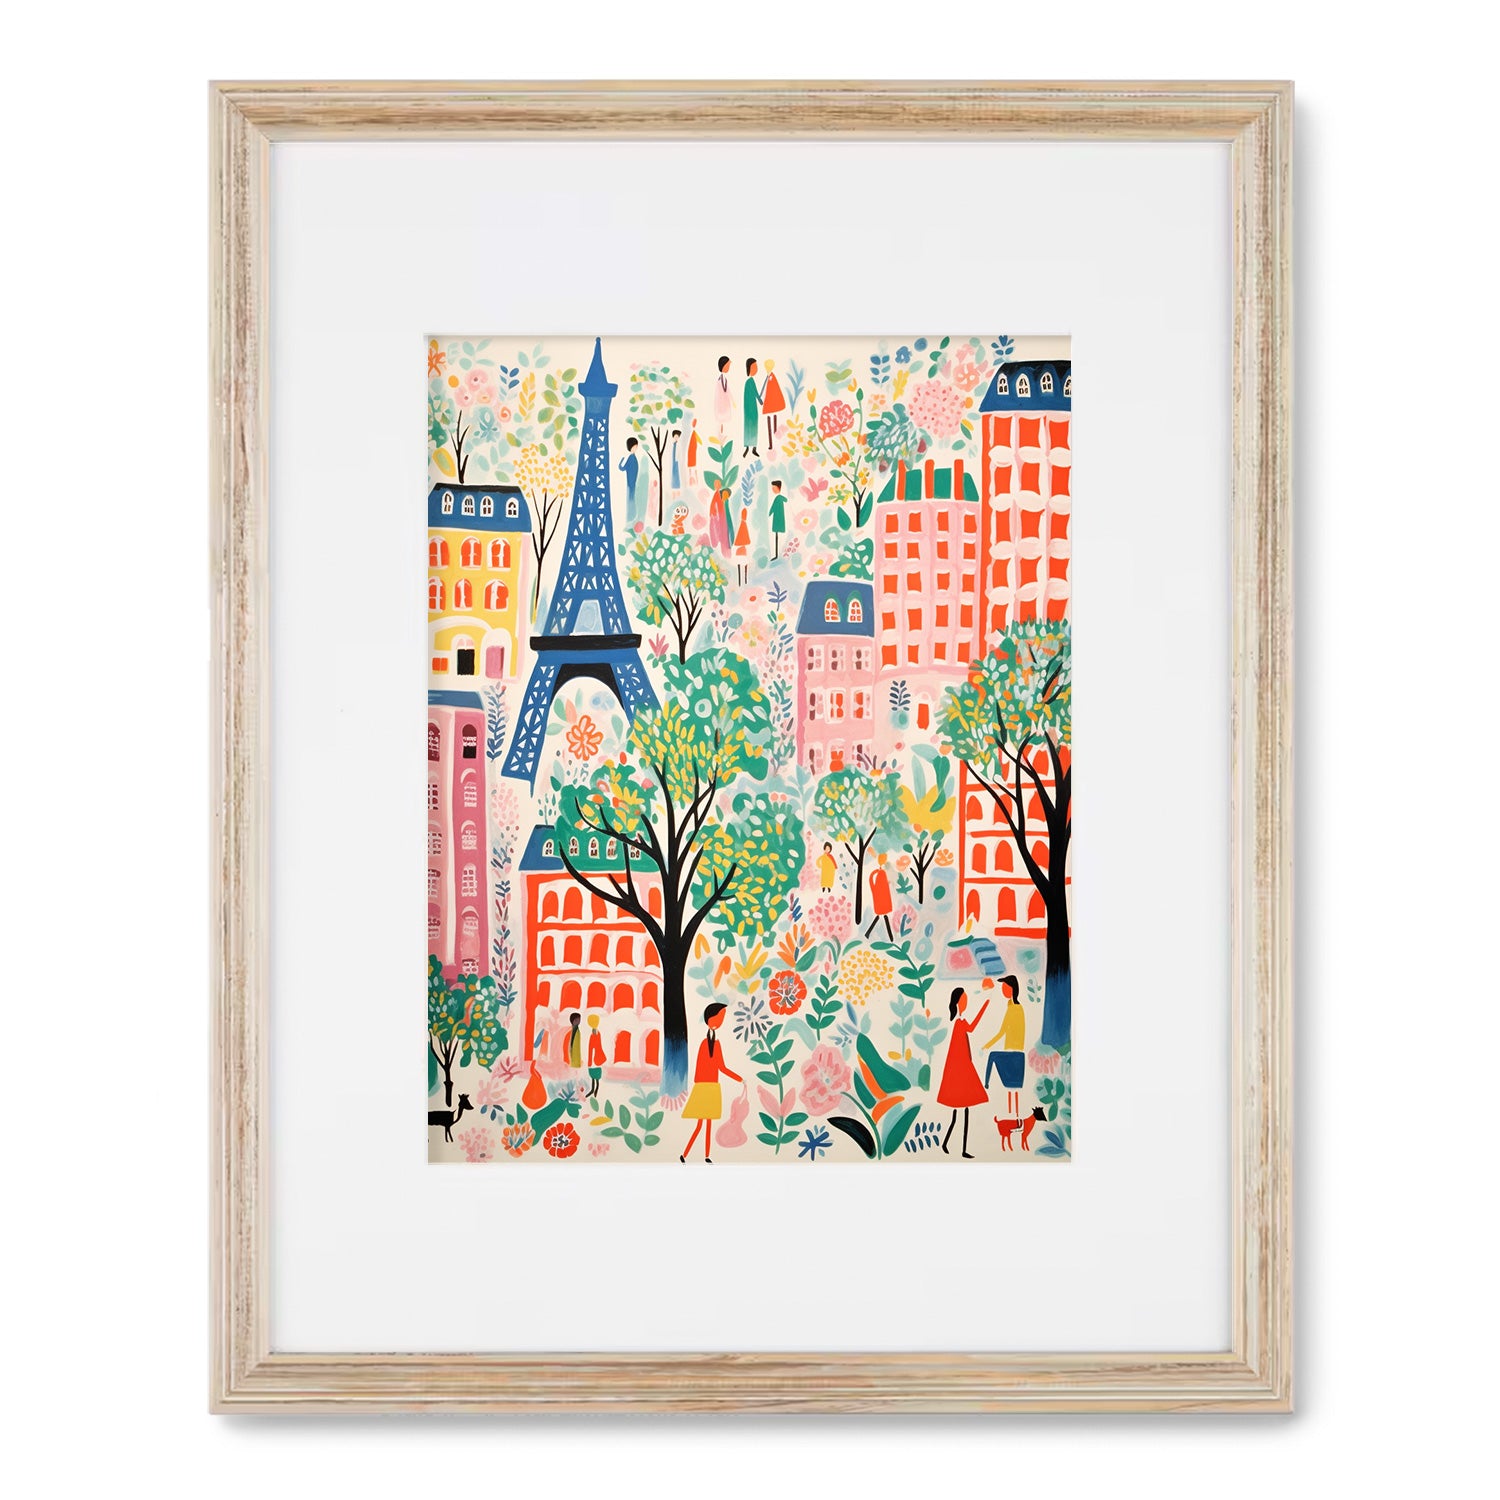 A Croissants & Butter wall art print featuring people and the Eiffel Tower in Paris by Stannie & Lloyd.